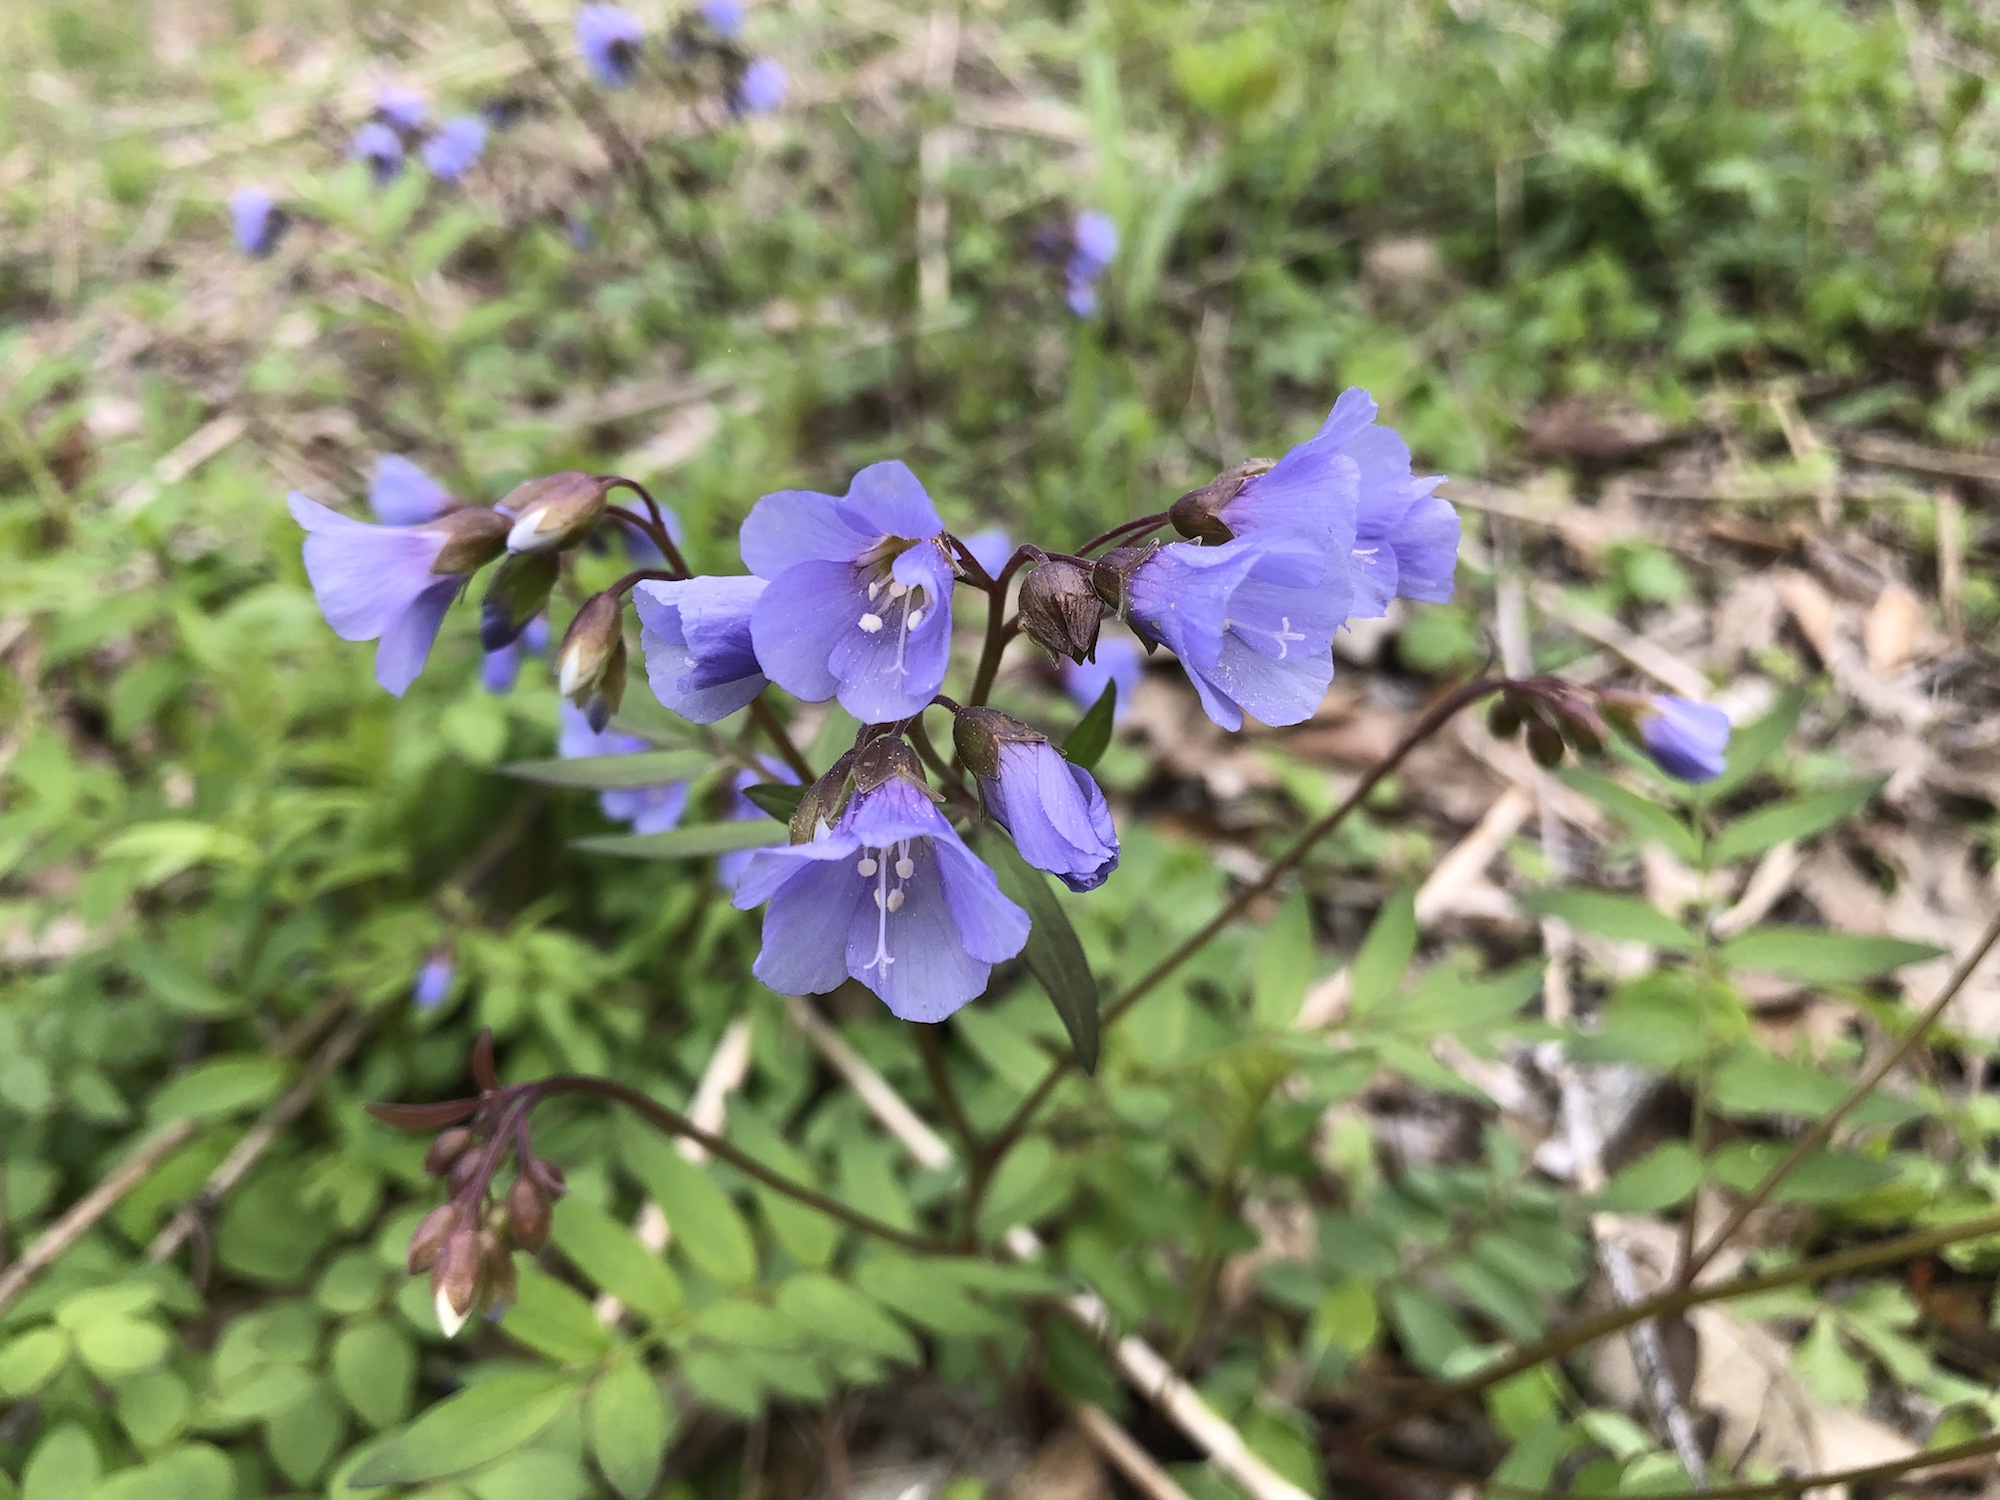 Jacob's Ladder in Oak Savanna in Madison, Wisconsin on May 10, 2019.